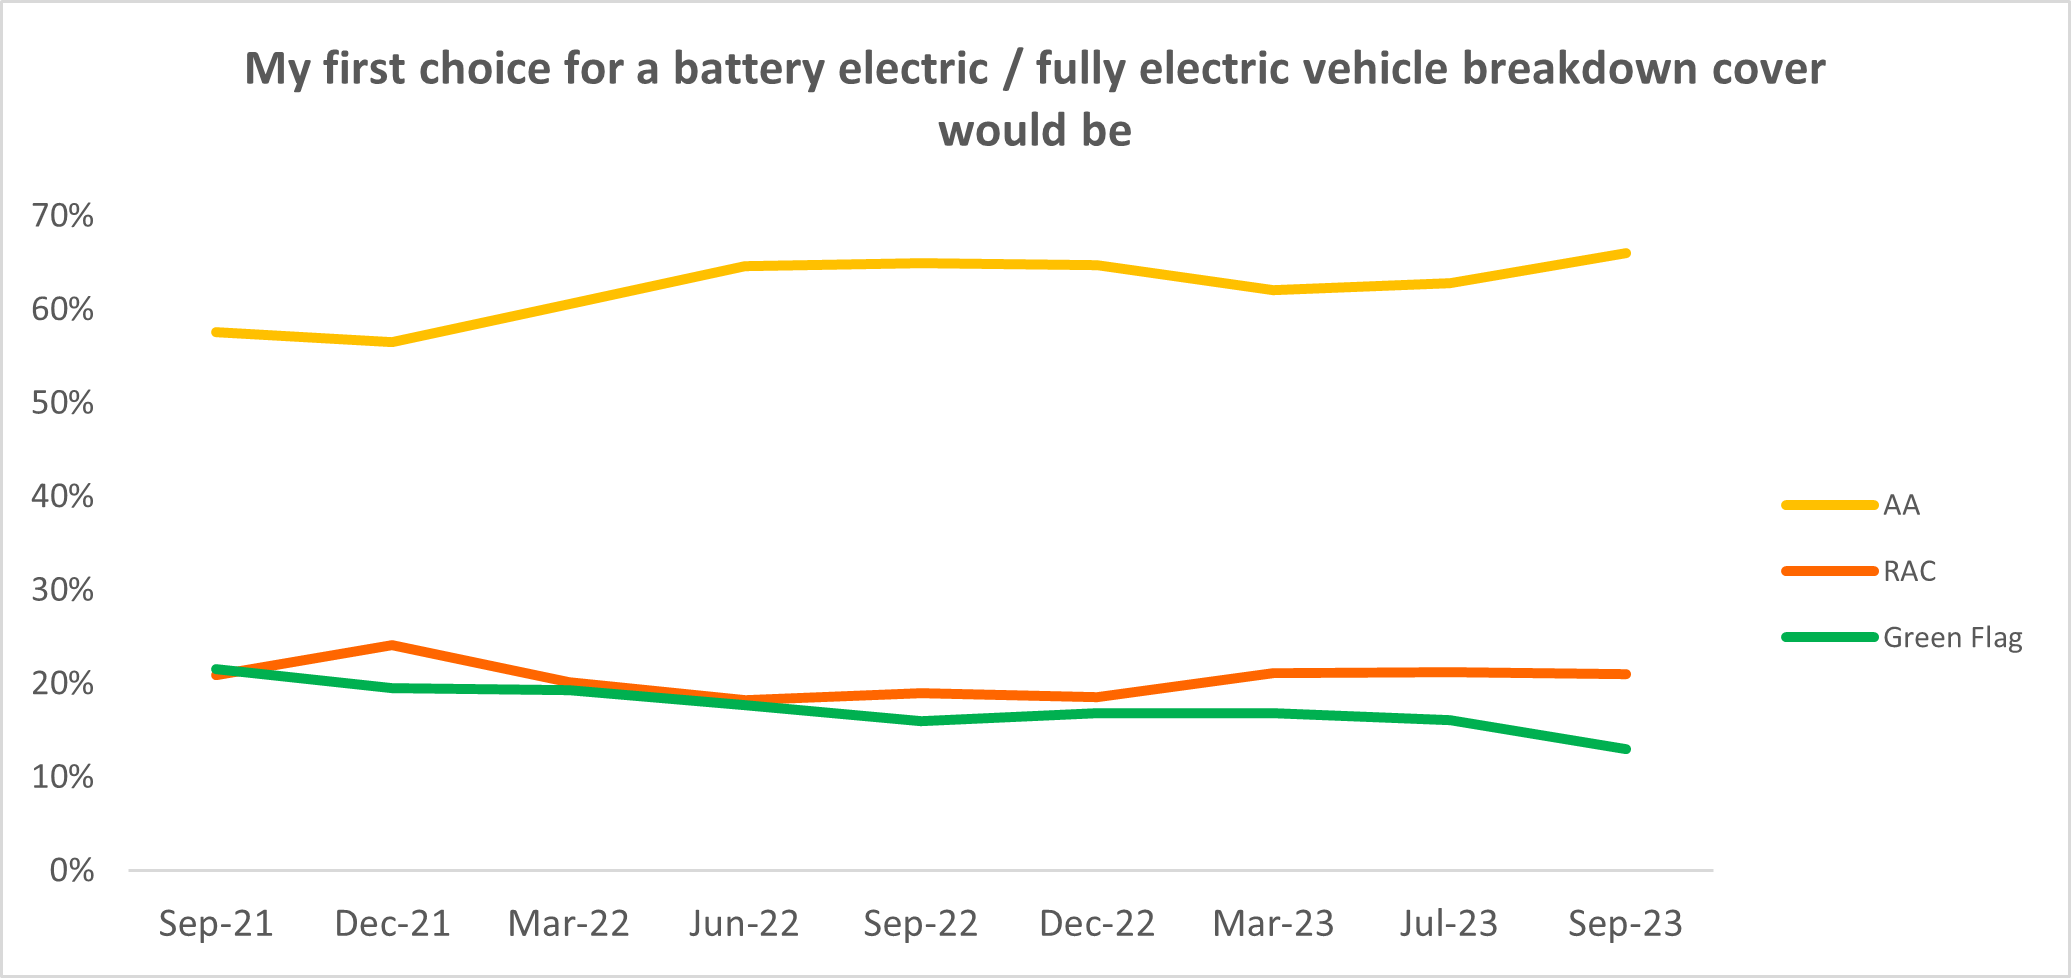 A graph showing that around 60% of respondents said the AA would be their first choice for electric vehicle breakdown cover from 2021 to 2023. This is versus the RAC and Green Flag.